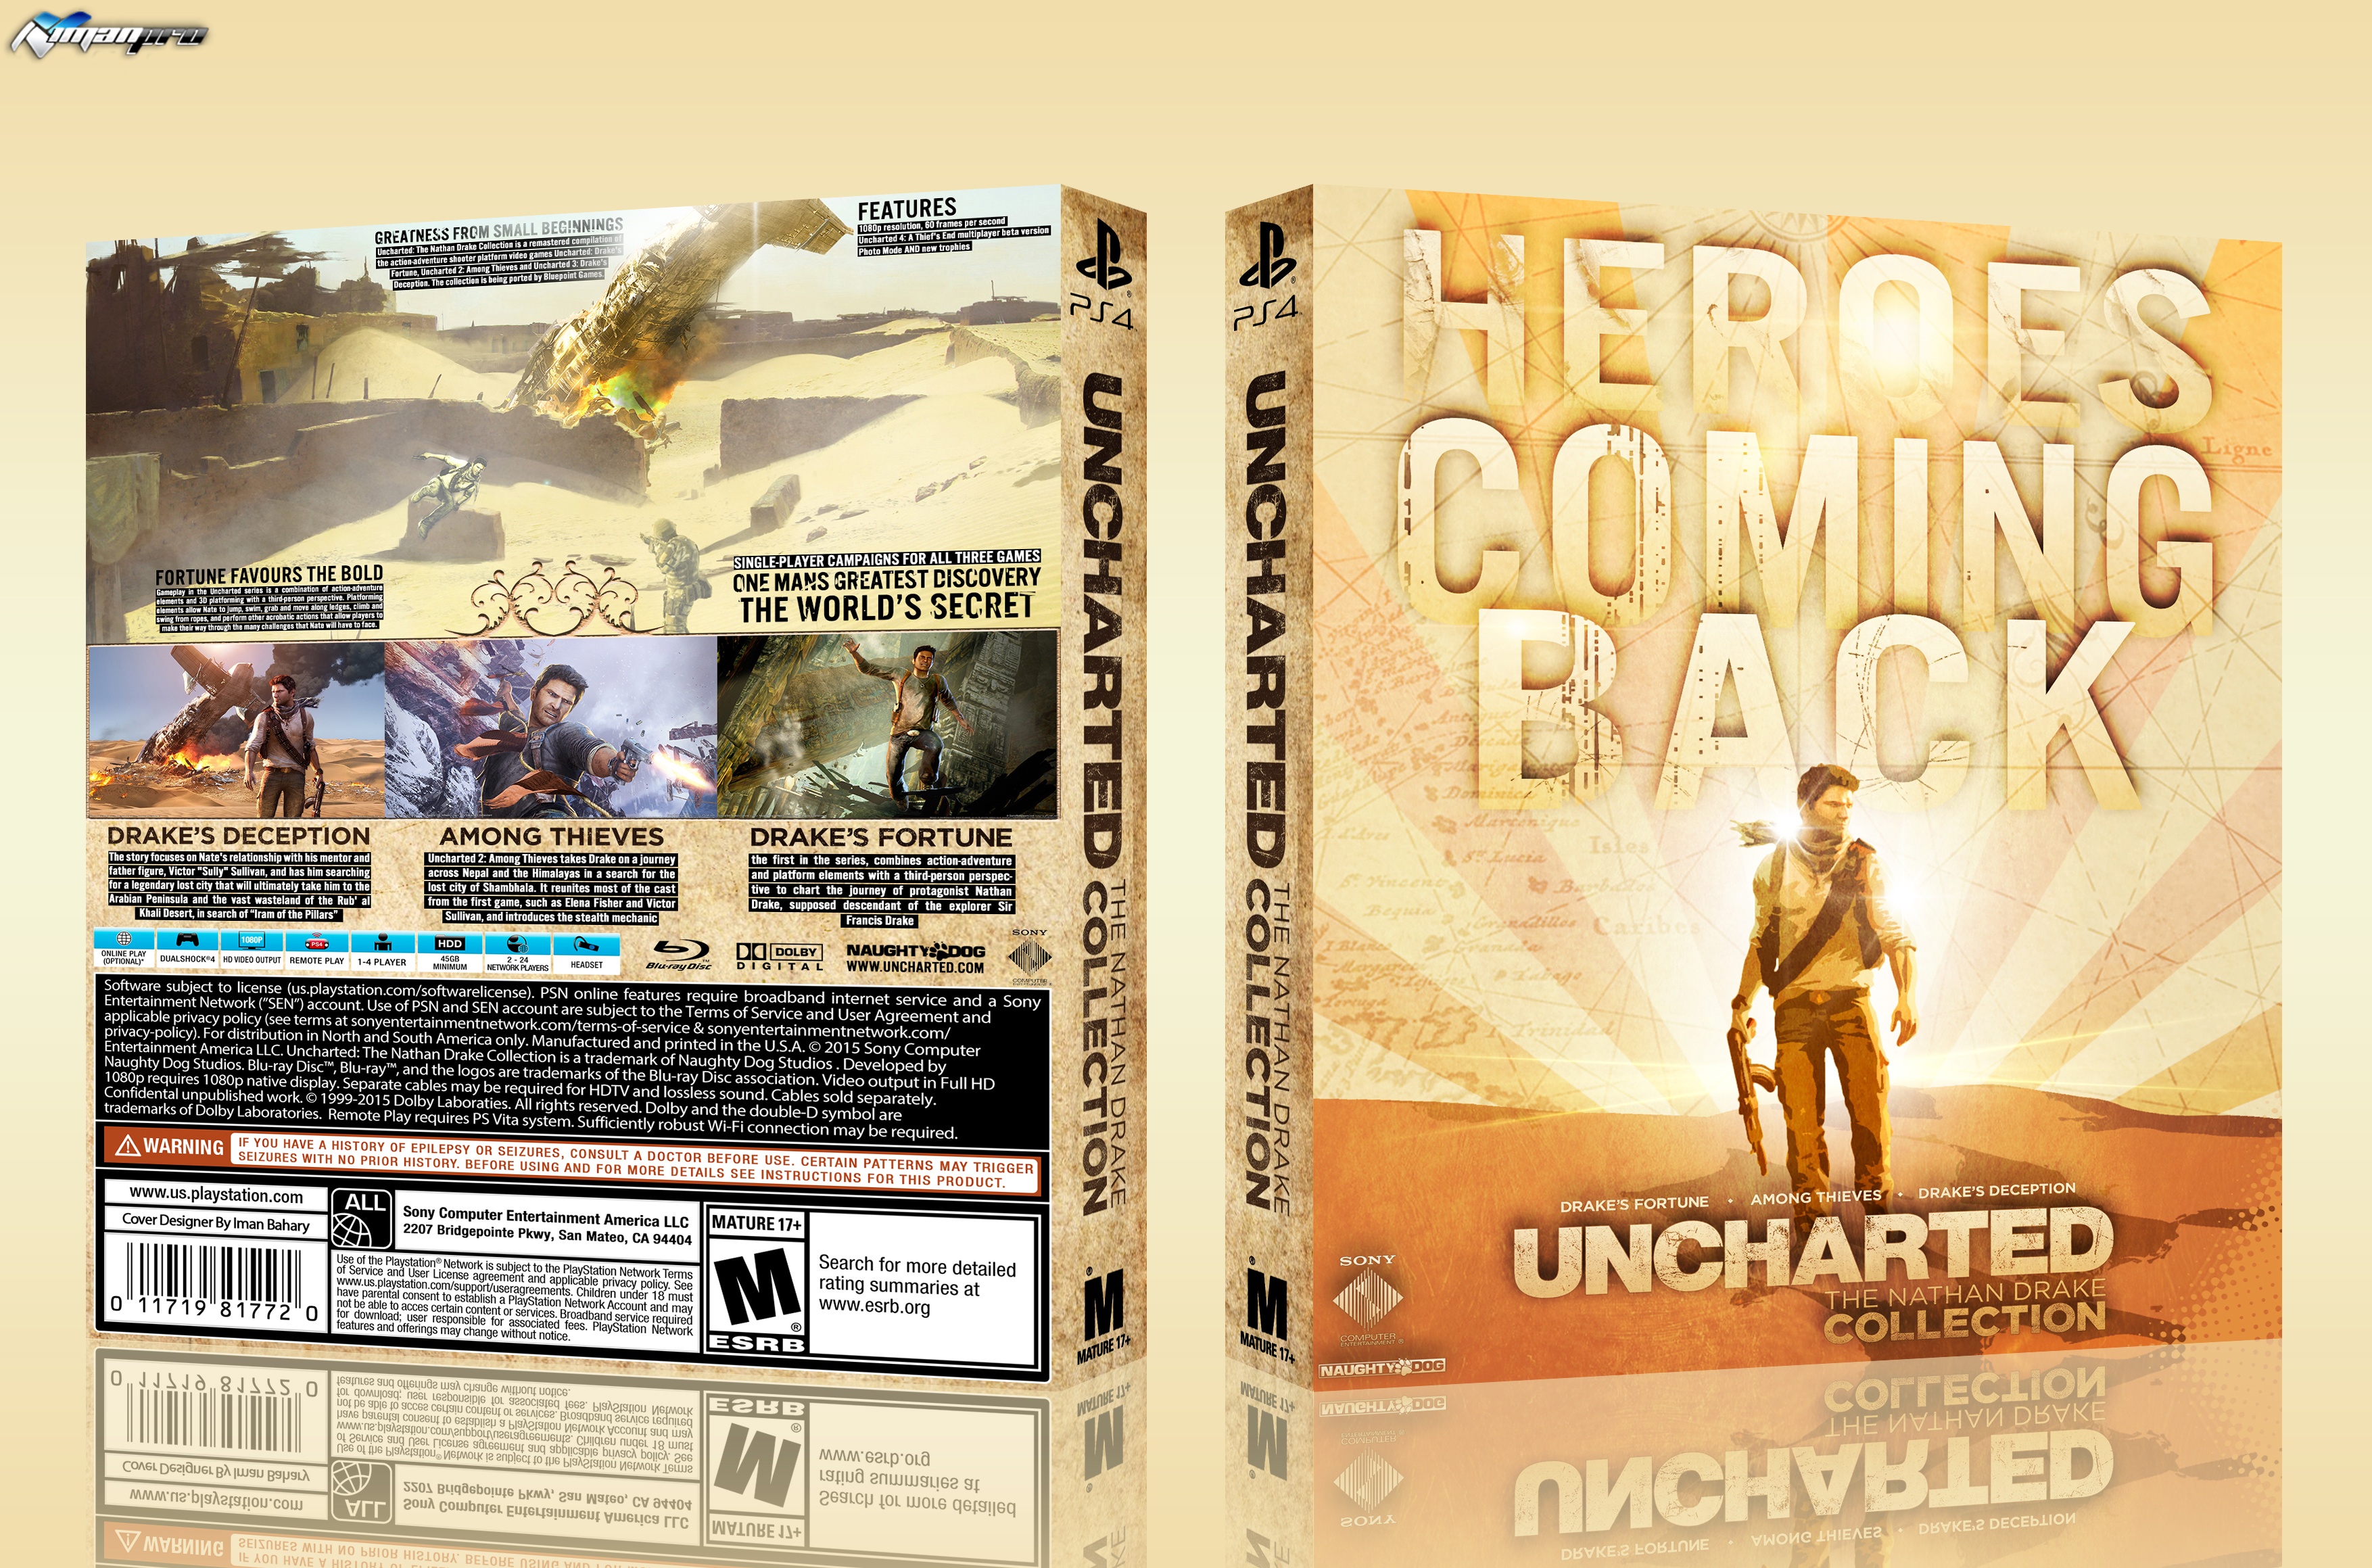 Uncharted:The Nathan Drake Collection box cover